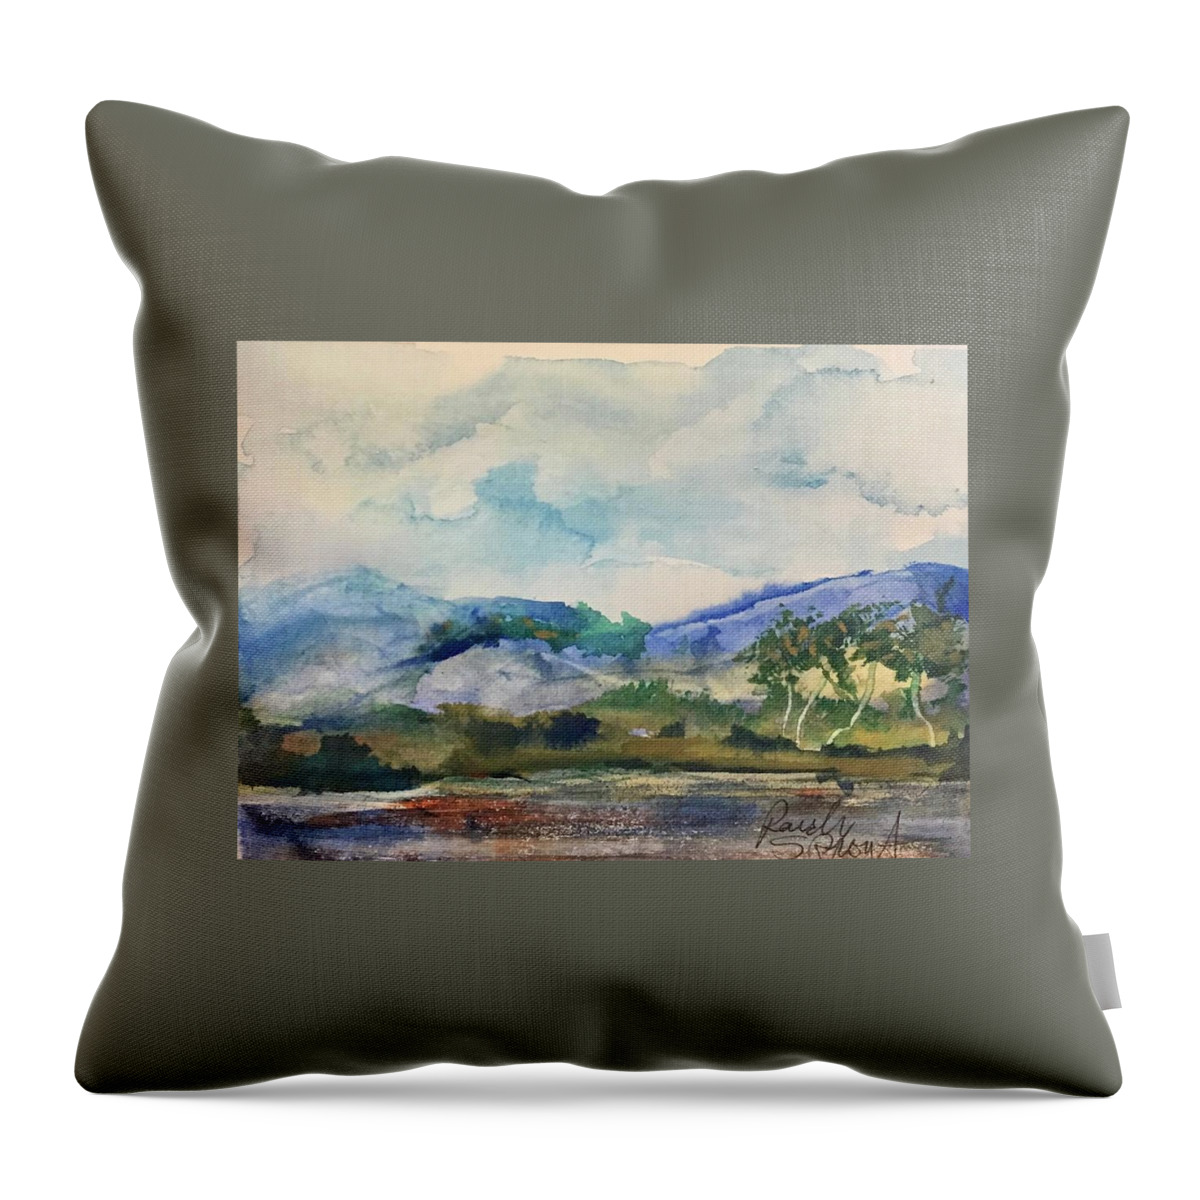 Bimini Throw Pillow featuring the painting Last Demo on Bimini by Randy Sprout